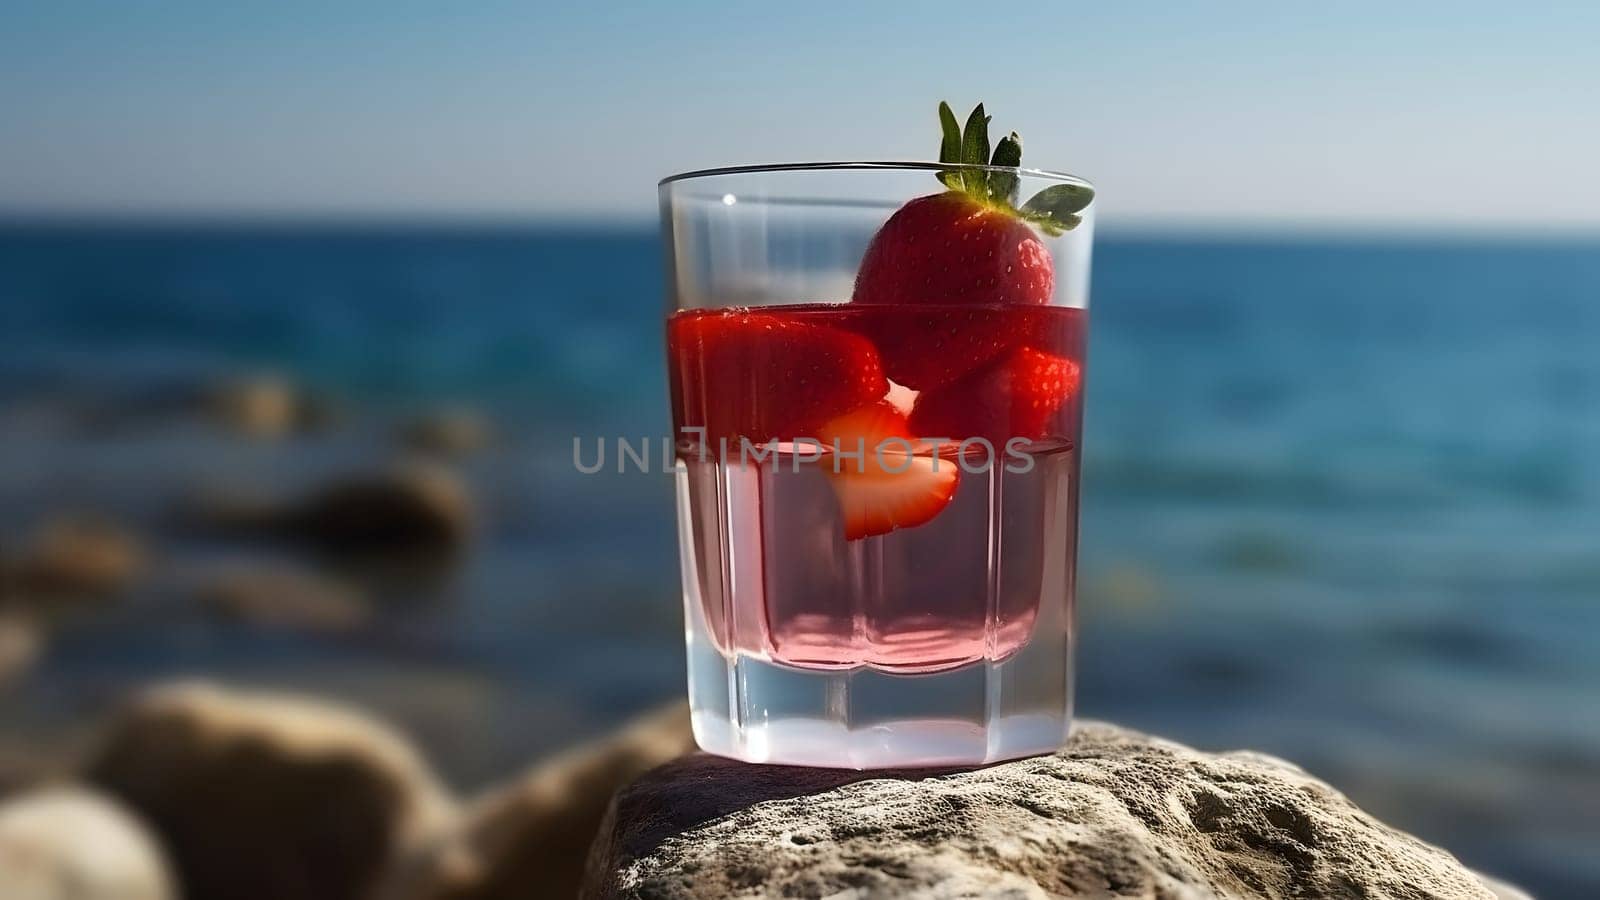 A glass of strawberries cold refreshing drink on sea background at sunny summer day. Neural network generated in May 2023. Not based on any actual person, scene or pattern.